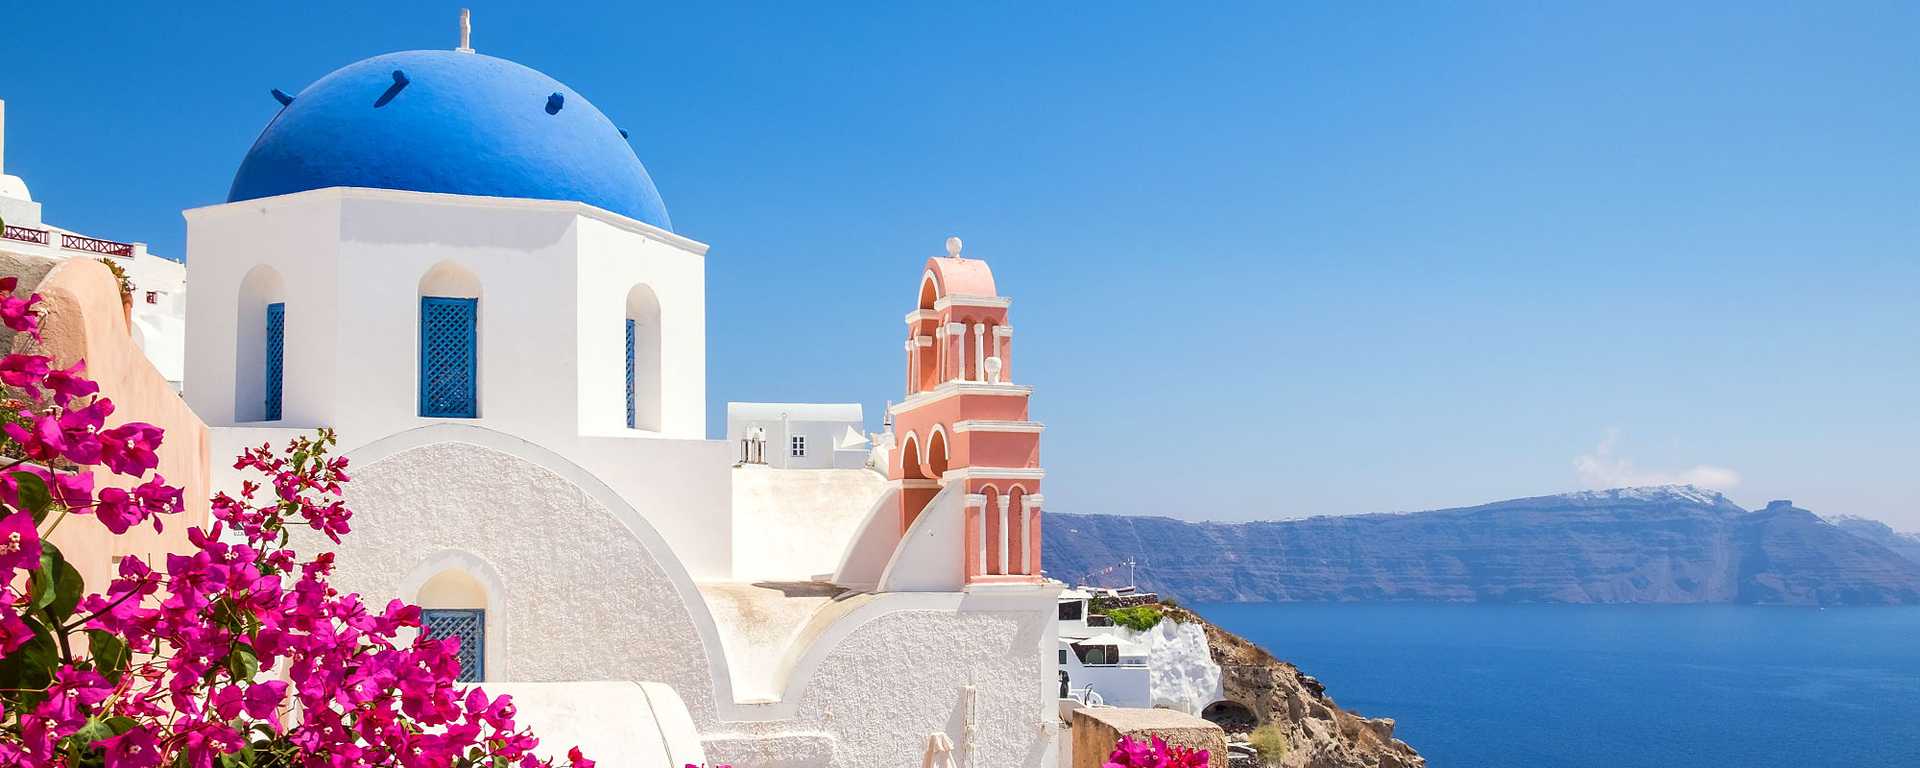 Scenic view of traditional cycladic house with flowers in the foreground at Oia village in Santorini, Greece.